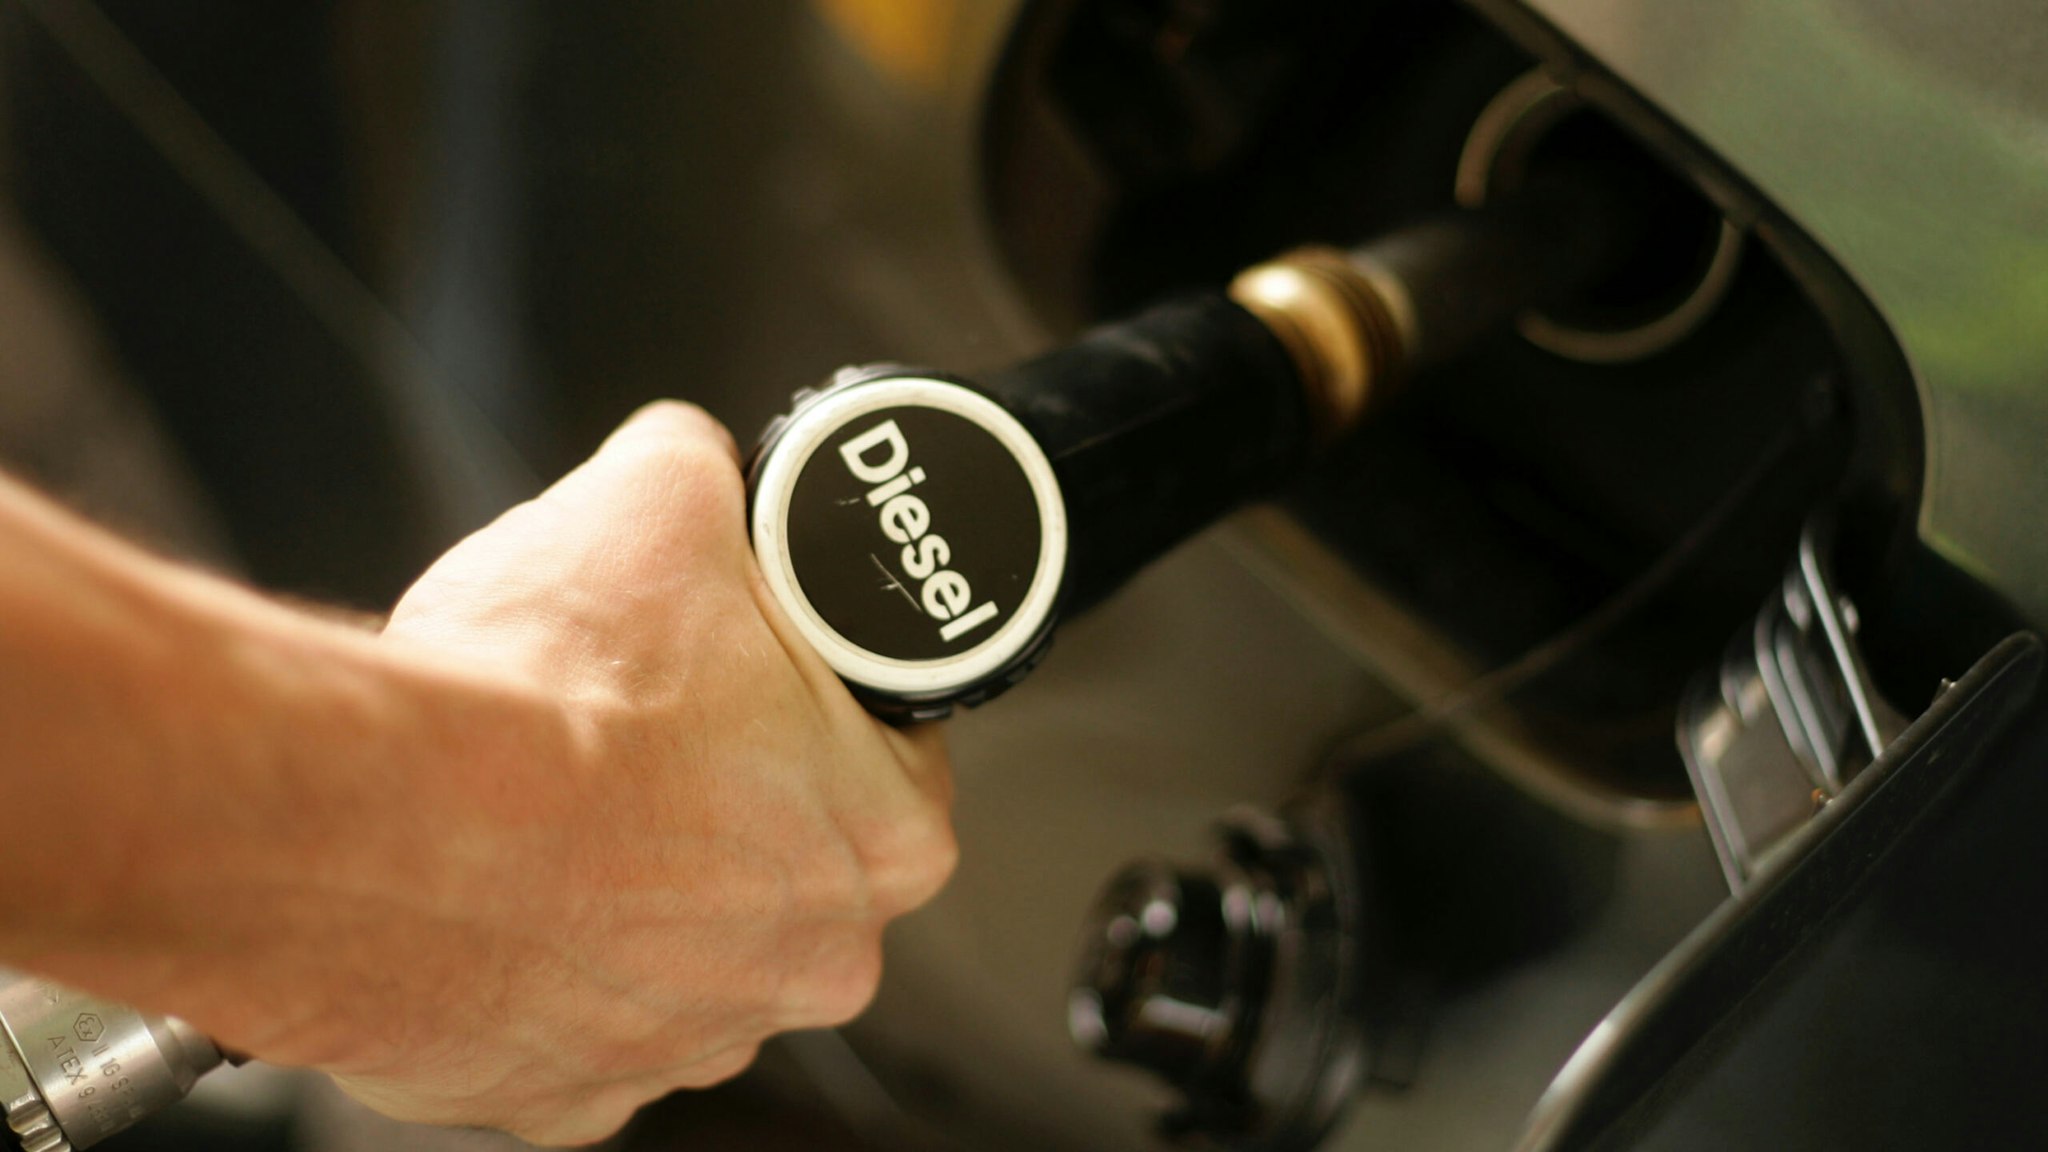 A driver fills up the tank of his car with diesel at a fuel station on May 29, 2008 in Luxembourg city.